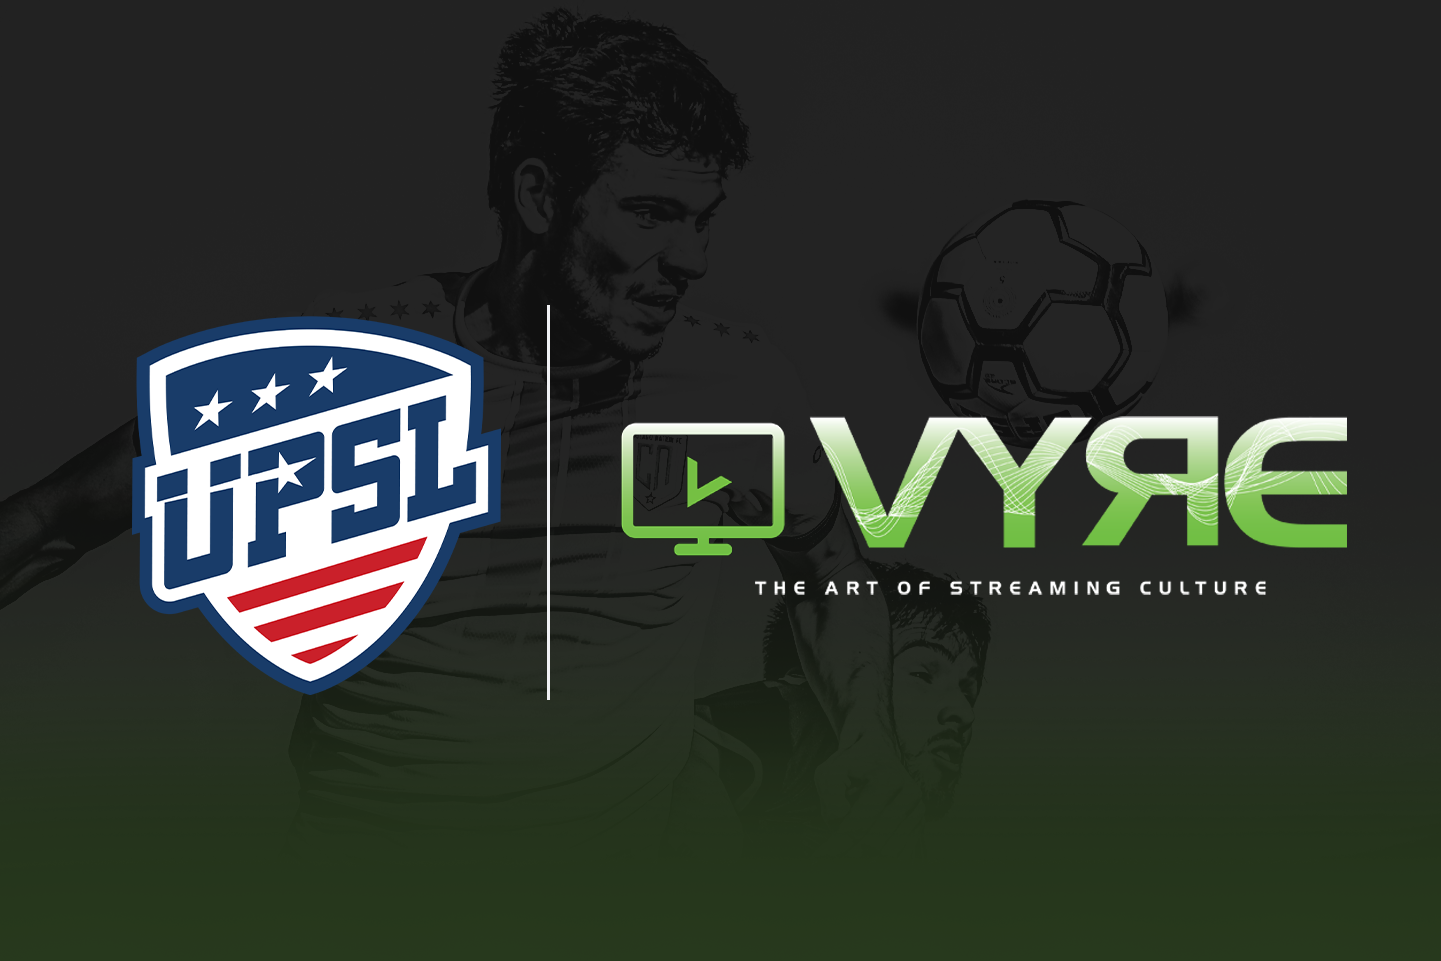 VYRE NETWORK PARTNERS WITH THE UPSL ON A LANDMARK MEDIA RIGHTS DEAL FOR U.S